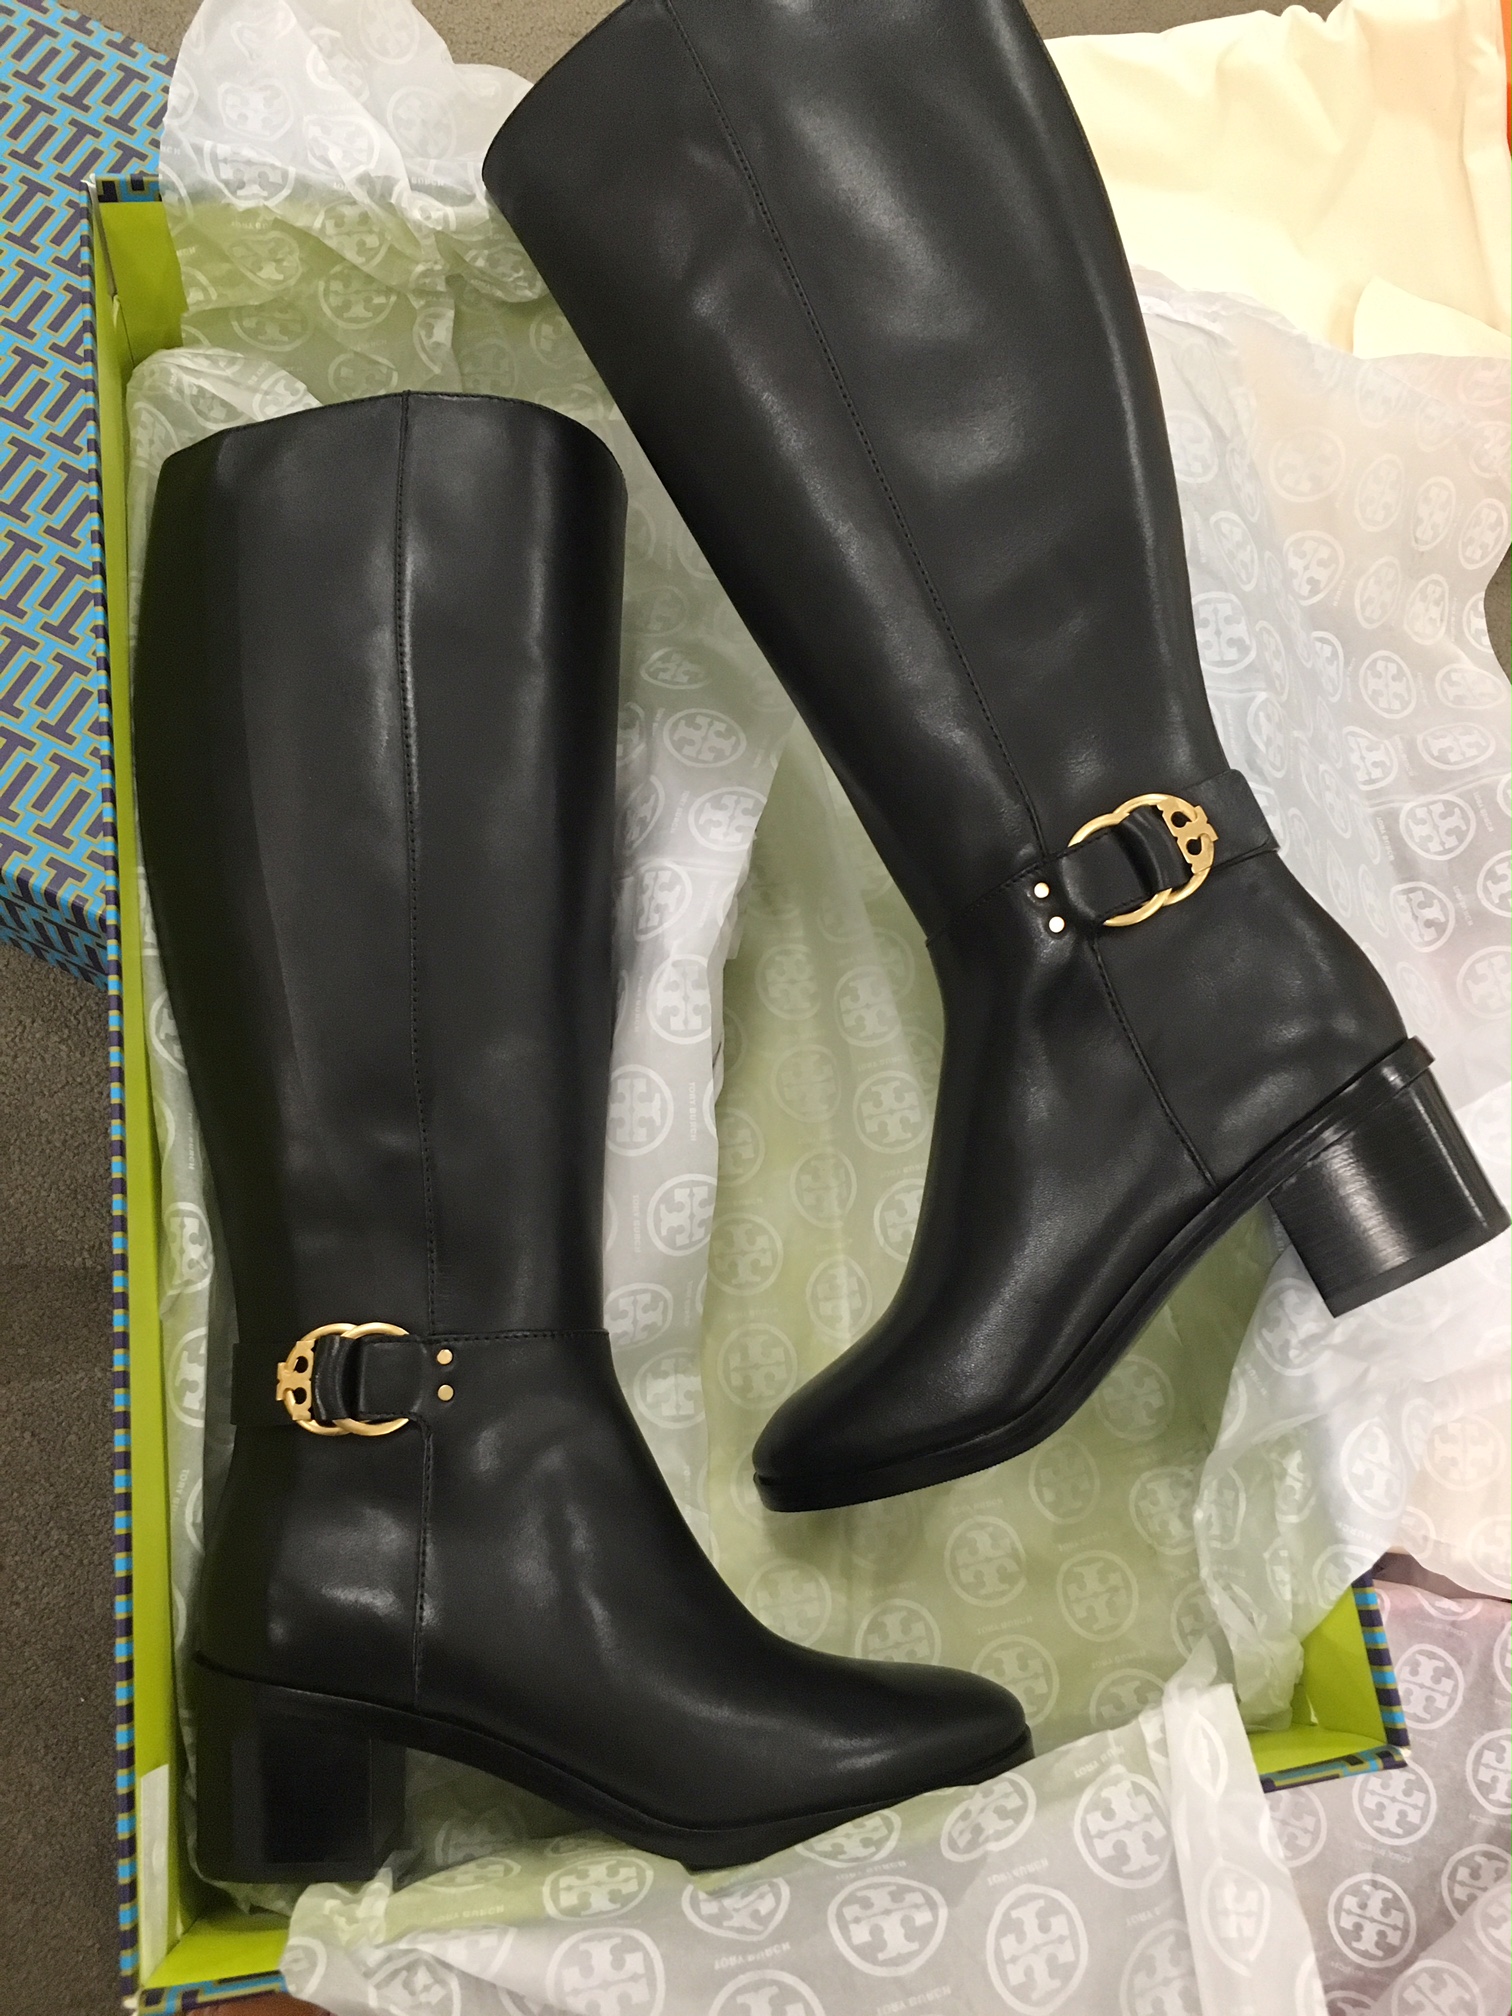 tory burch nordstrom anniversary boots - The Double Take Girls